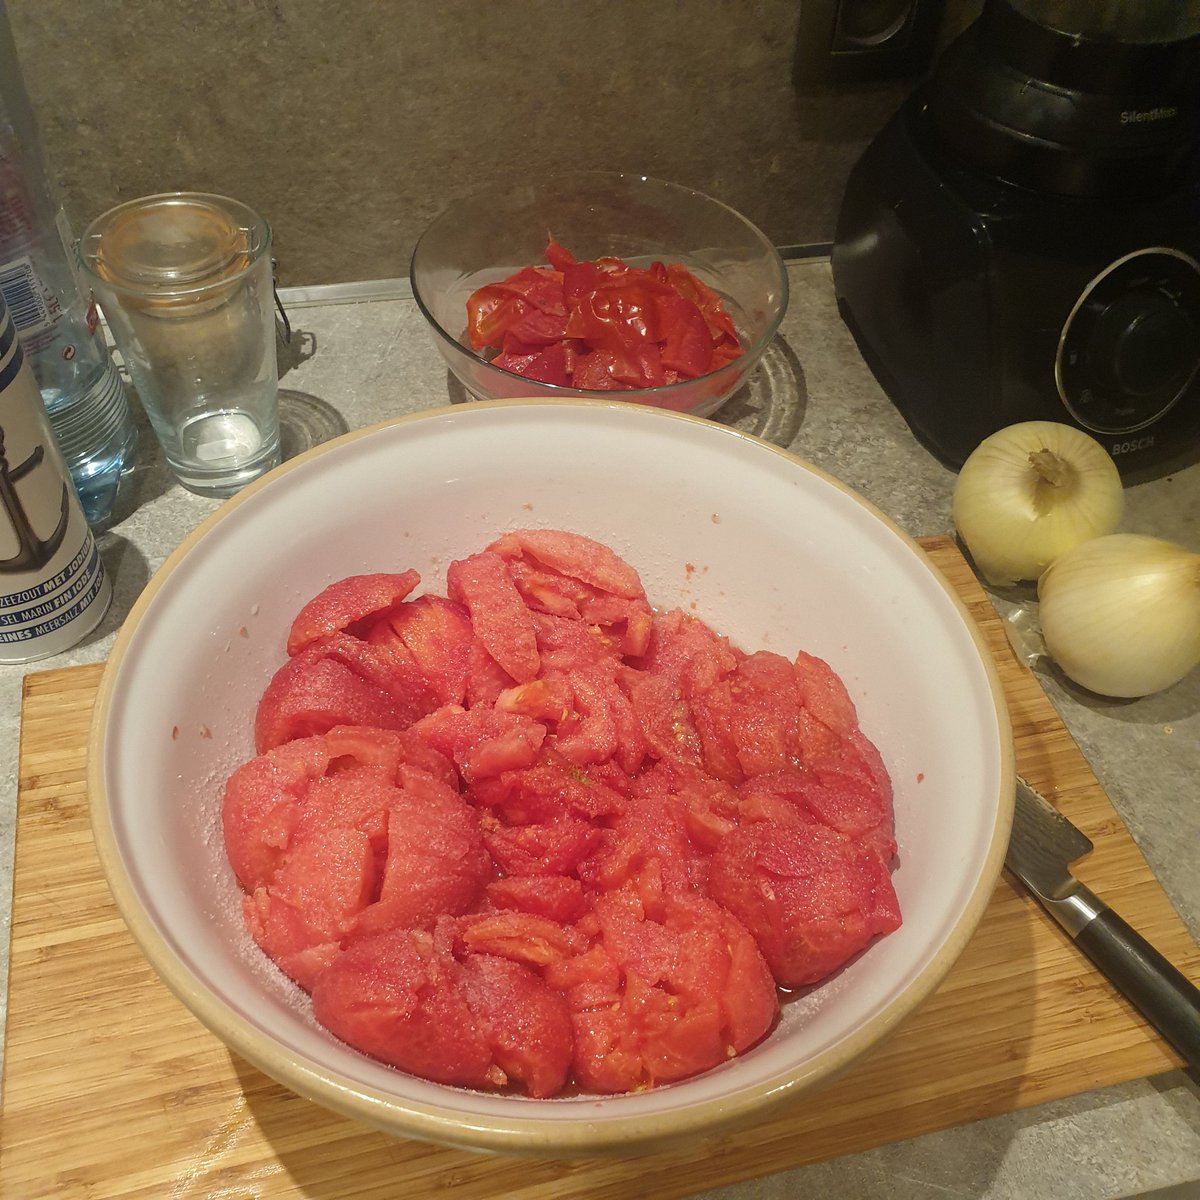 tomatoes blanched and peeled. save skinsroughly chop and liberally coat with salt. leave to sitpoach skins in olive oil on med low heat until oils have infused fully